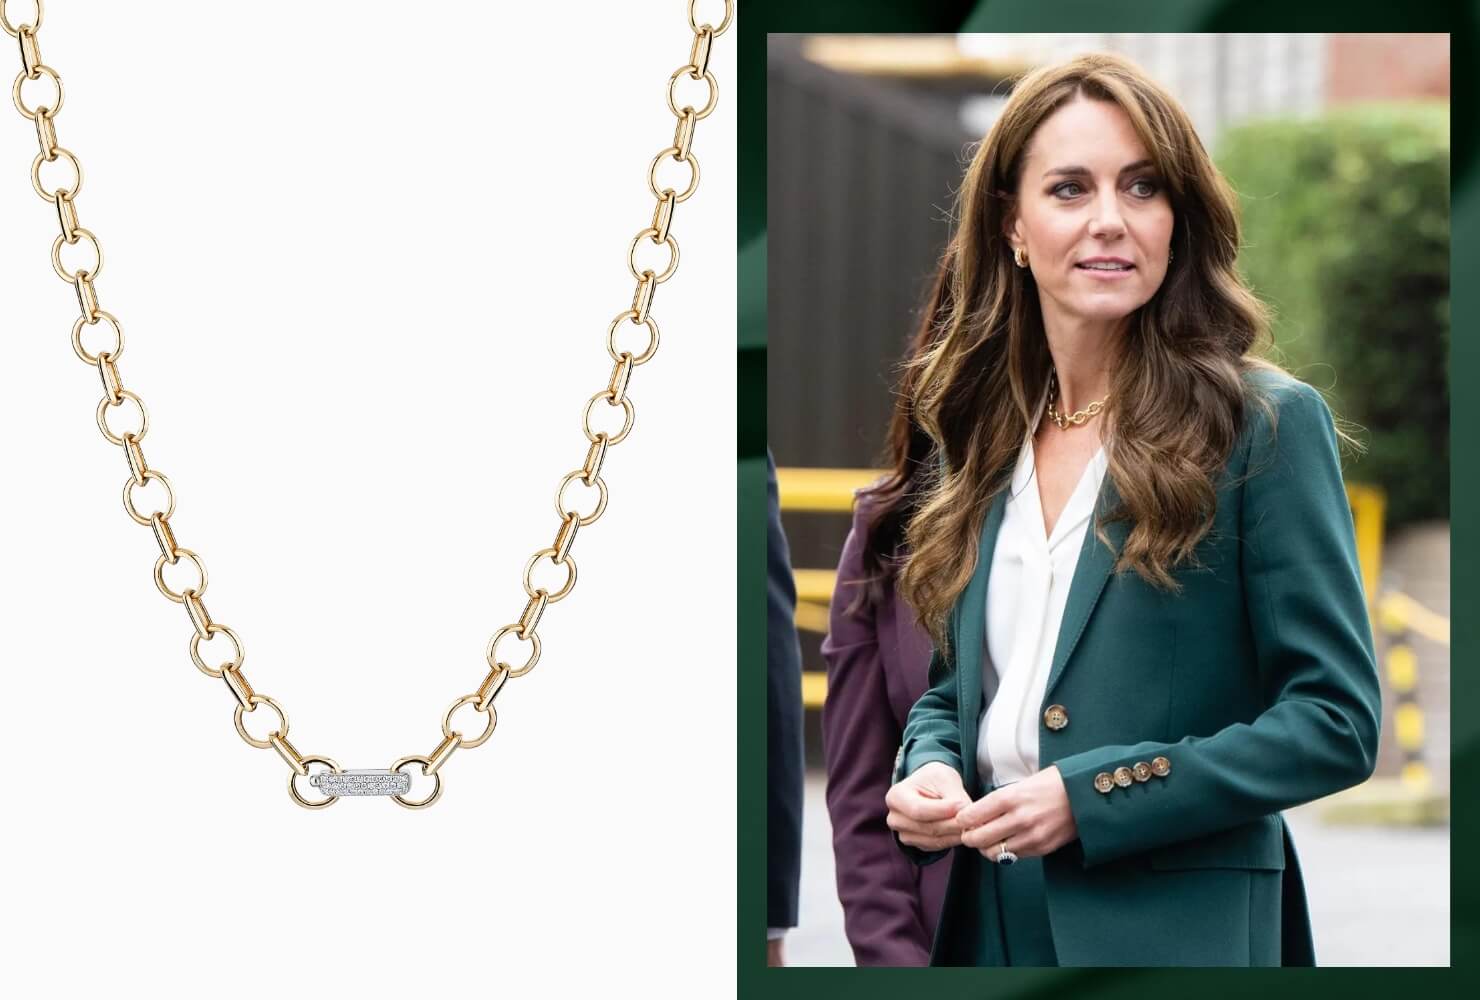 Image of Ecksand's Duel Oversized Gold Necklace on a white background next to an image of Kate Middleton wearing a very similar necklace